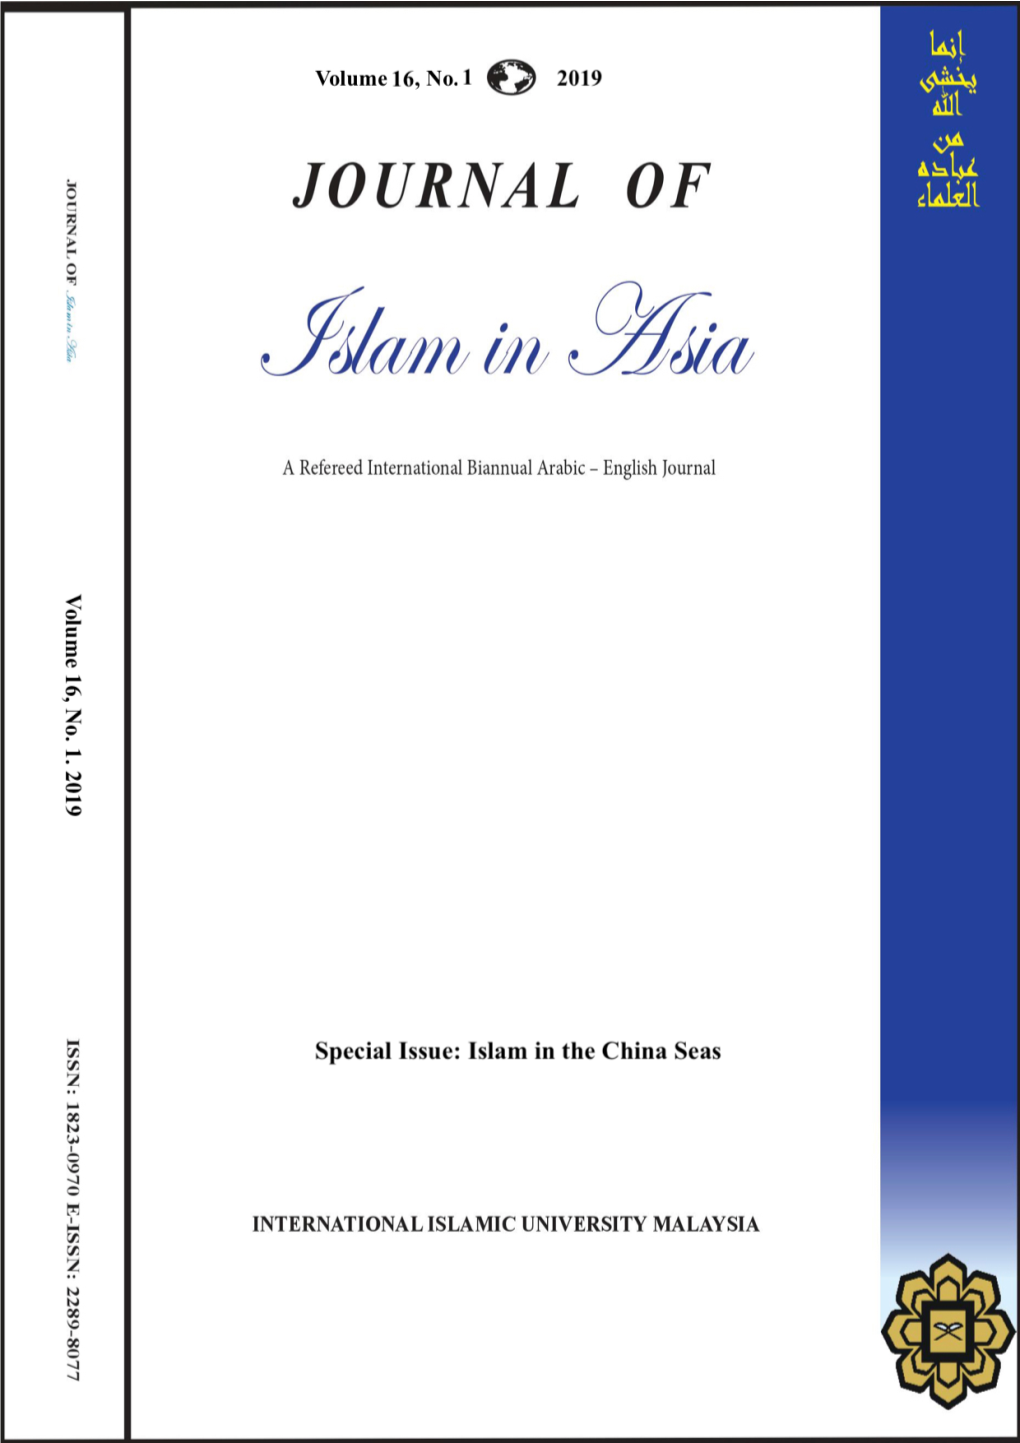 Journal of Islam in Asia